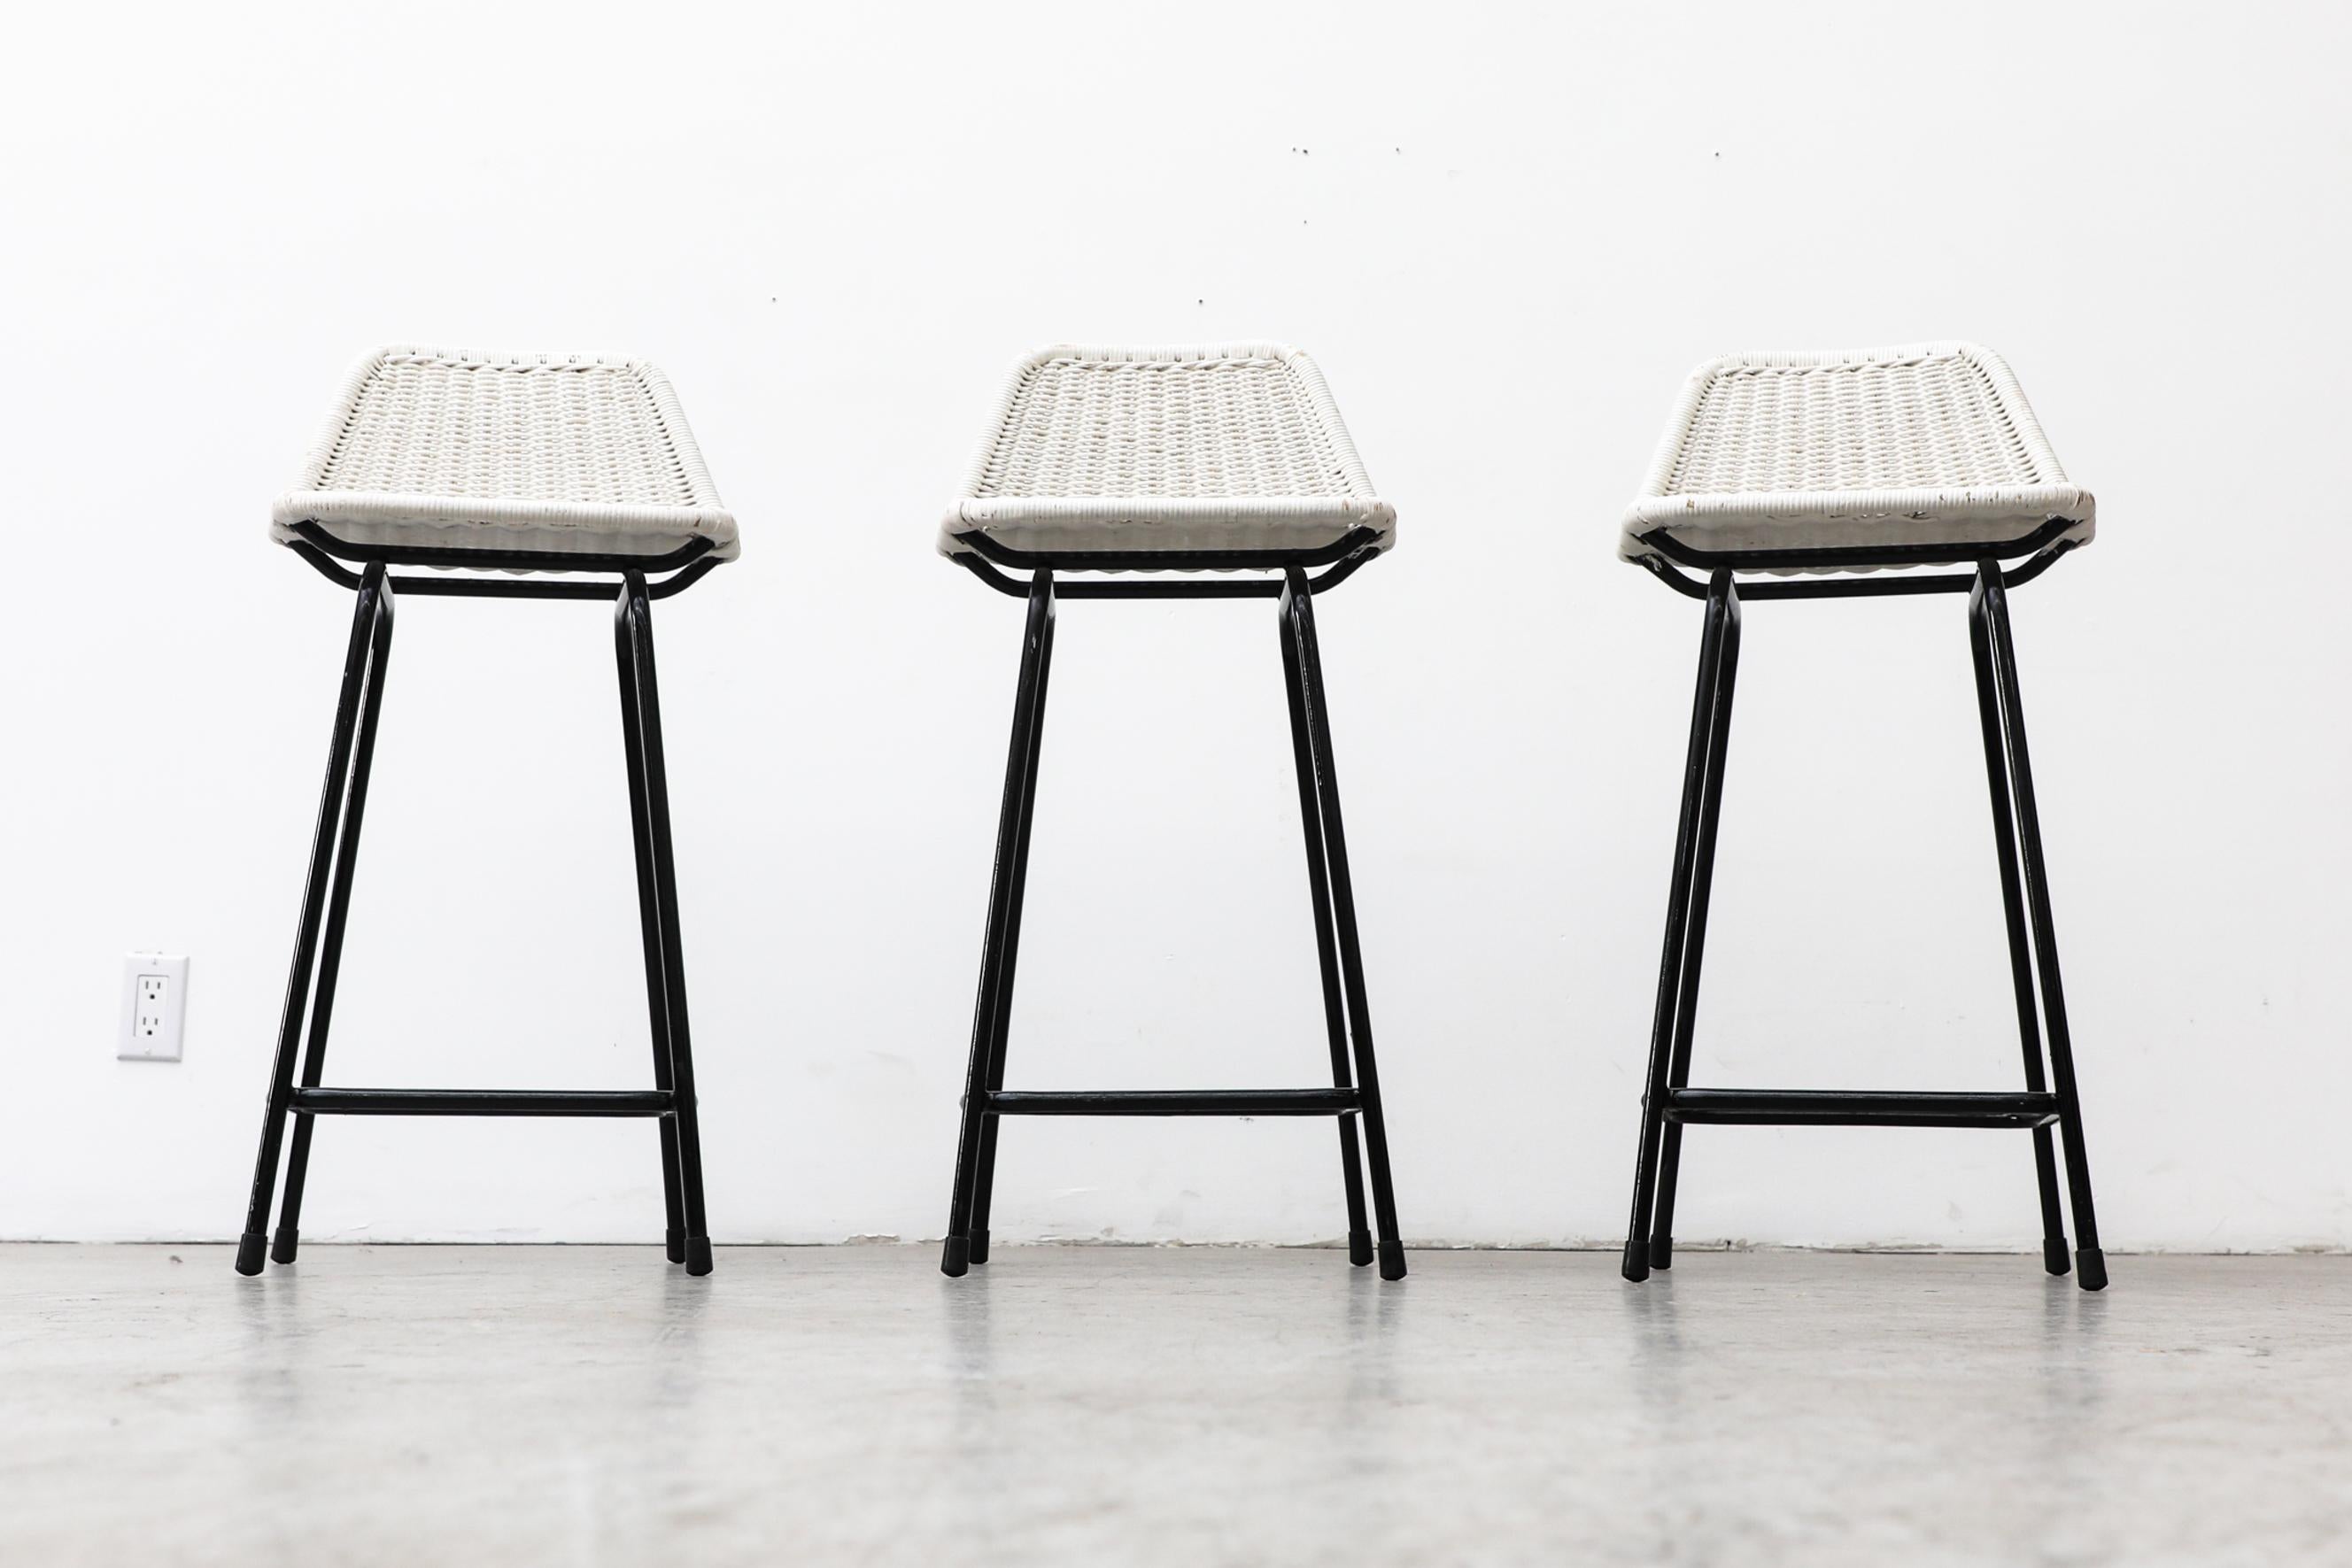 Set of 4 White Wicker Charlotte Perriand Style Counter Height Stools In Good Condition For Sale In Los Angeles, CA